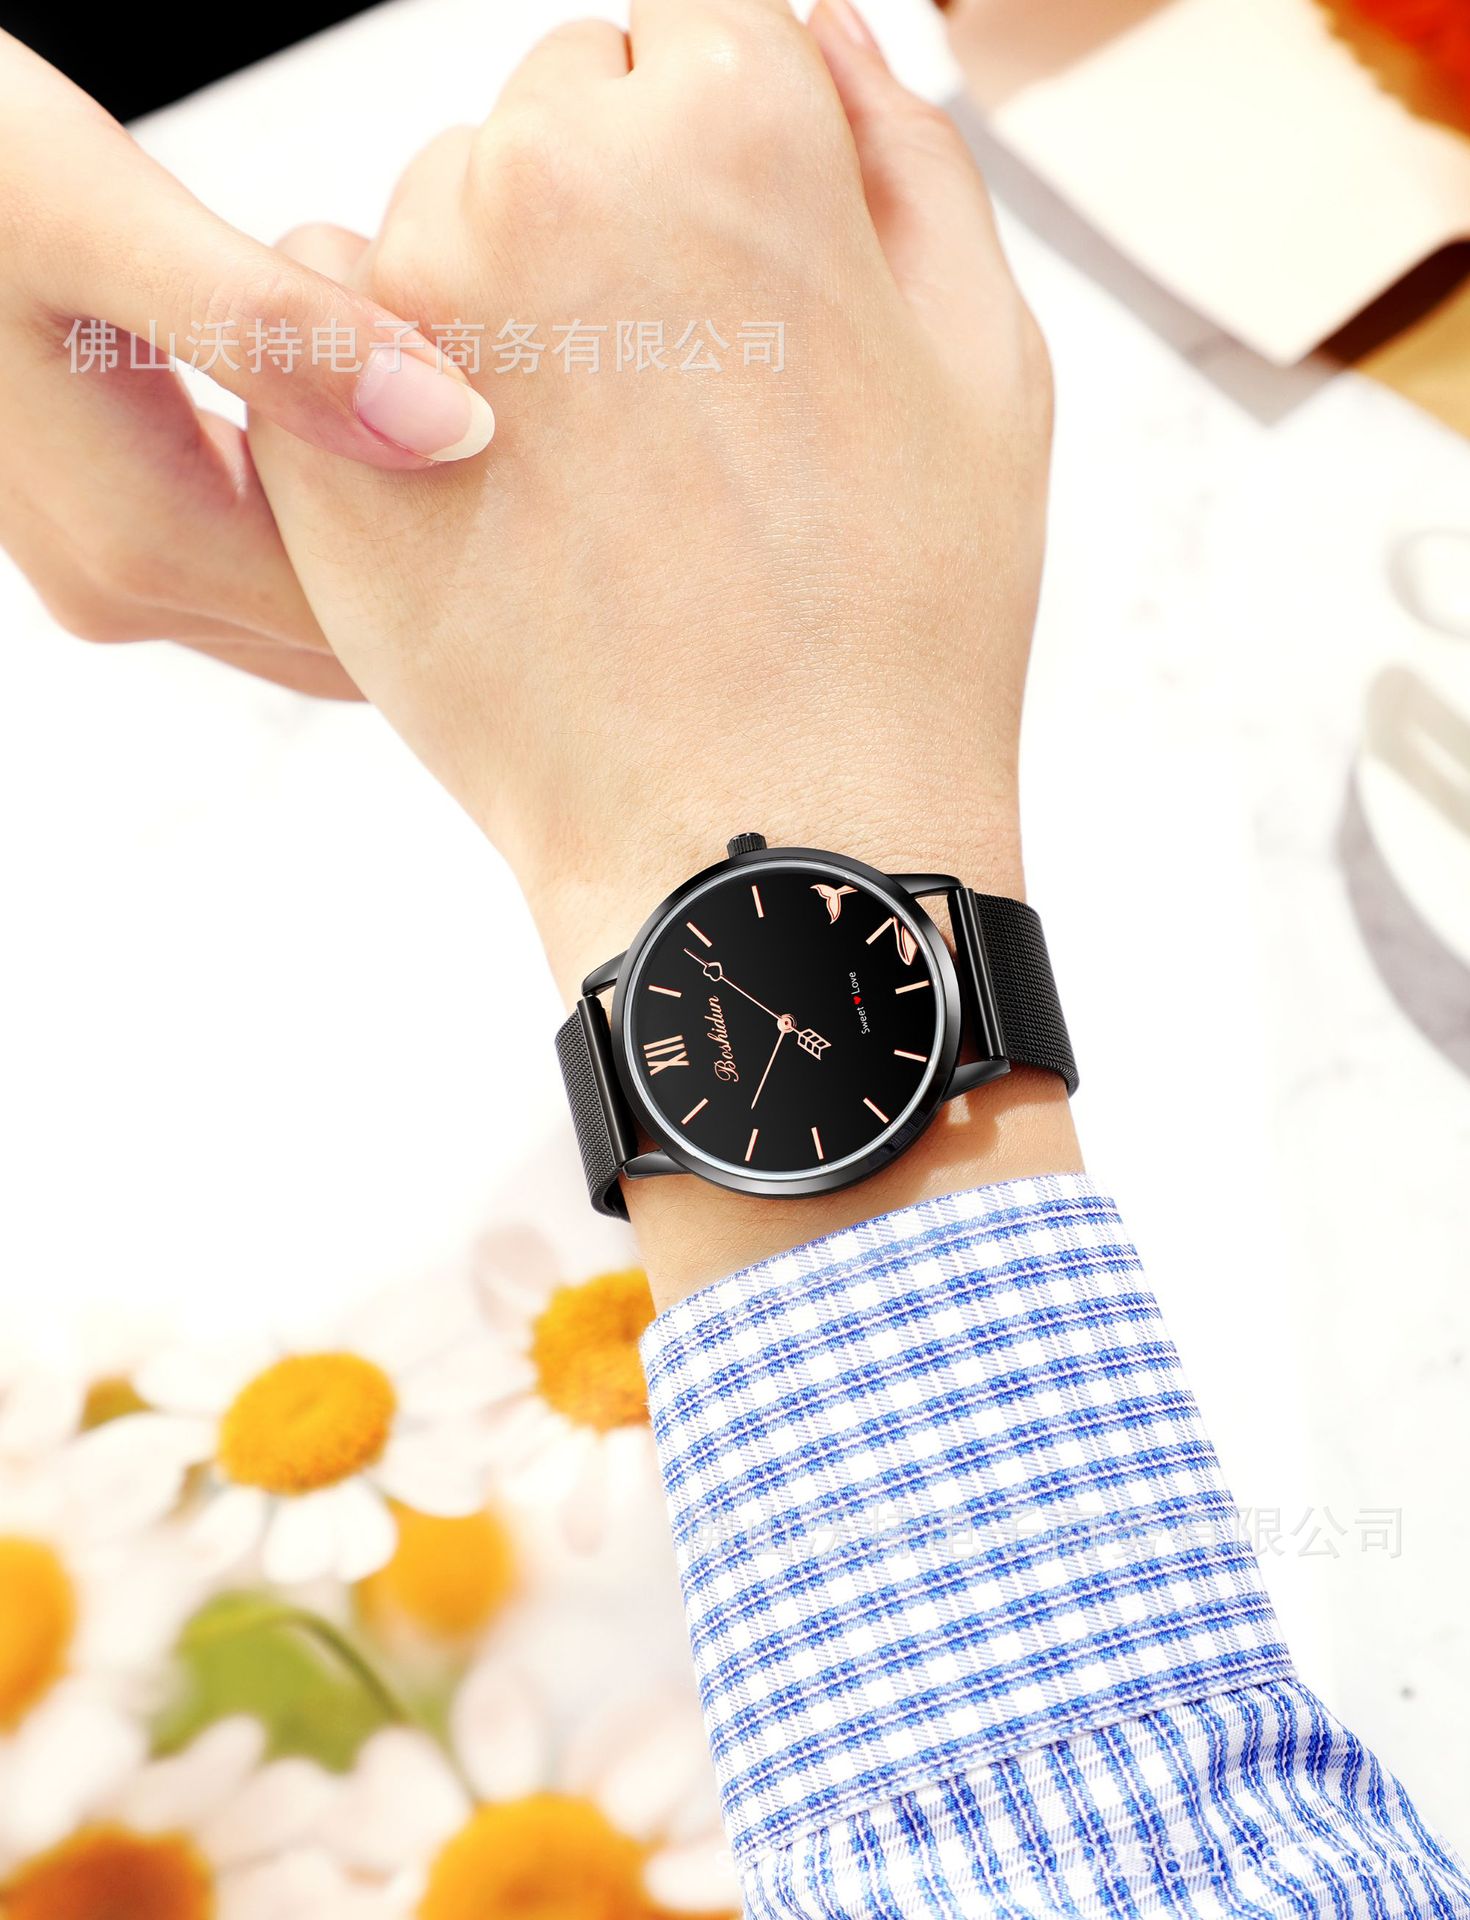 New couple watch a pair of watches for men and women for the rest of their lives have your fashion ultra thin waterproof manufacturers wholesale